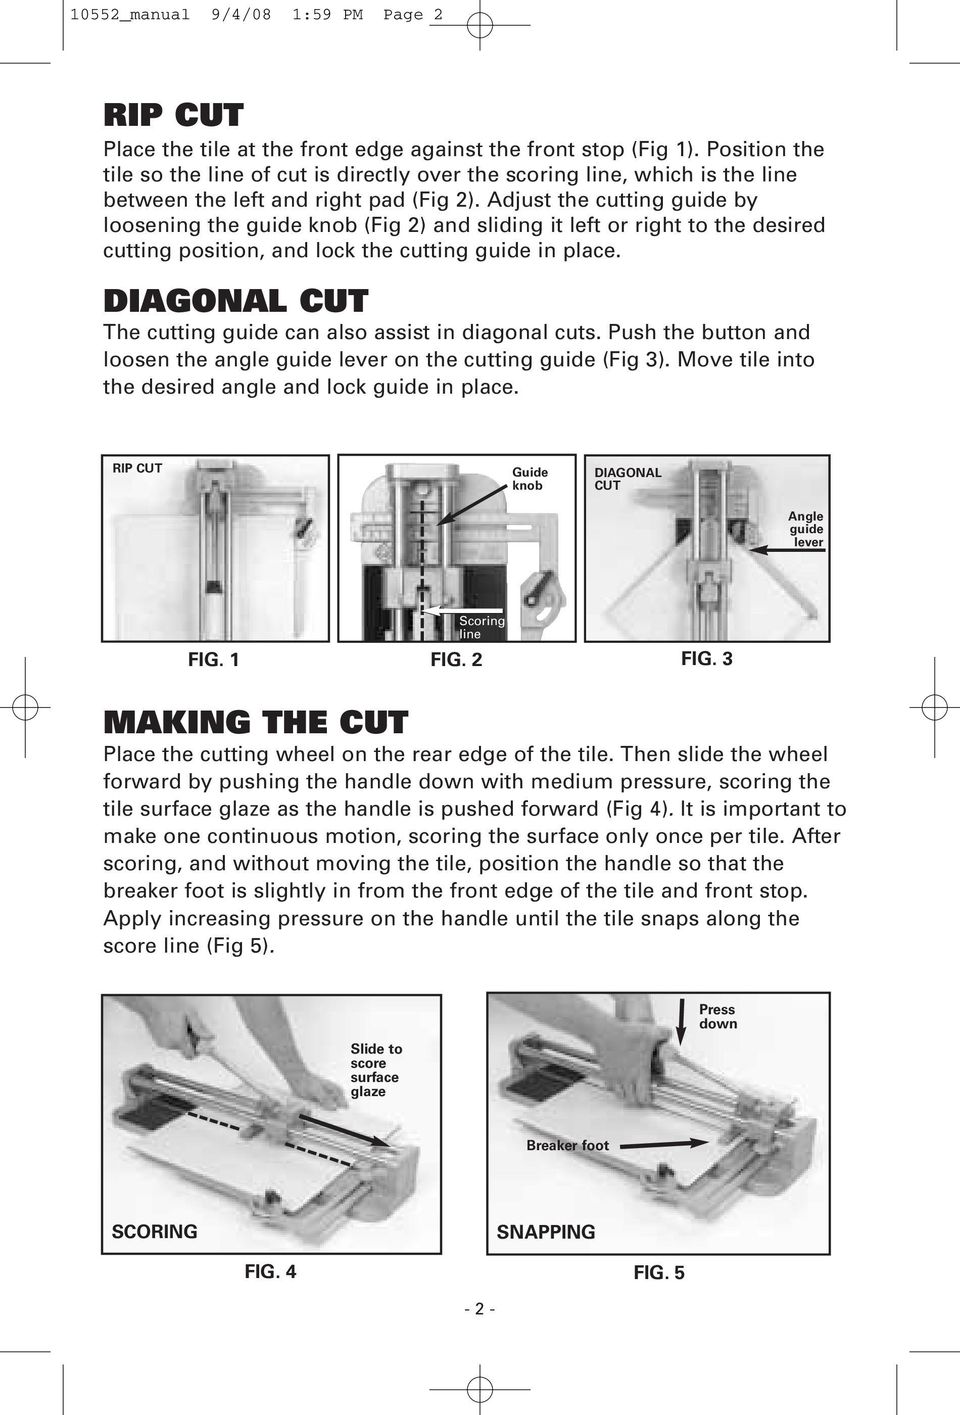 Adjust the cutting guide by loosening the guide knob (Fig 2) and sliding it left or right to the desired cutting position, and lock the cutting guide in place.